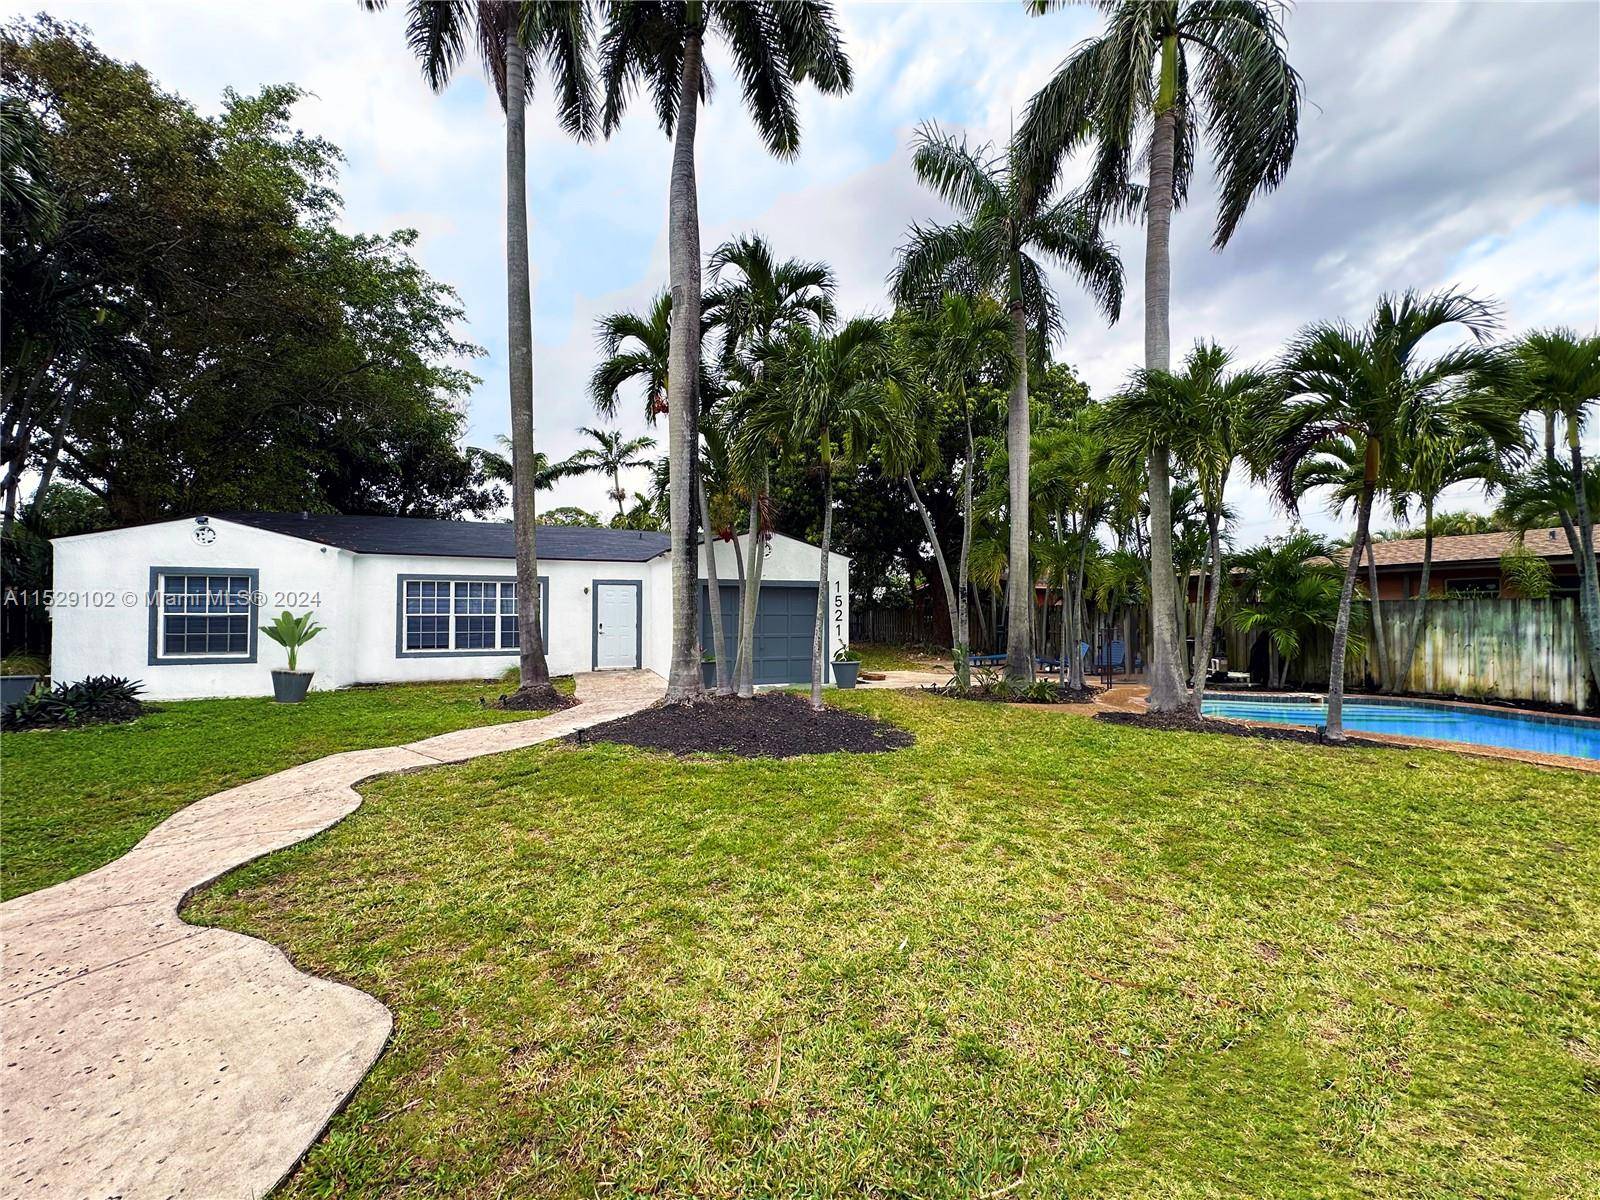 Beautiful 4 Bedroom, 2 bathoom turnkey property which is nestled in one of Fort Lauderdales most desirable neighborhoods of Wilton Manors, NO HOA.